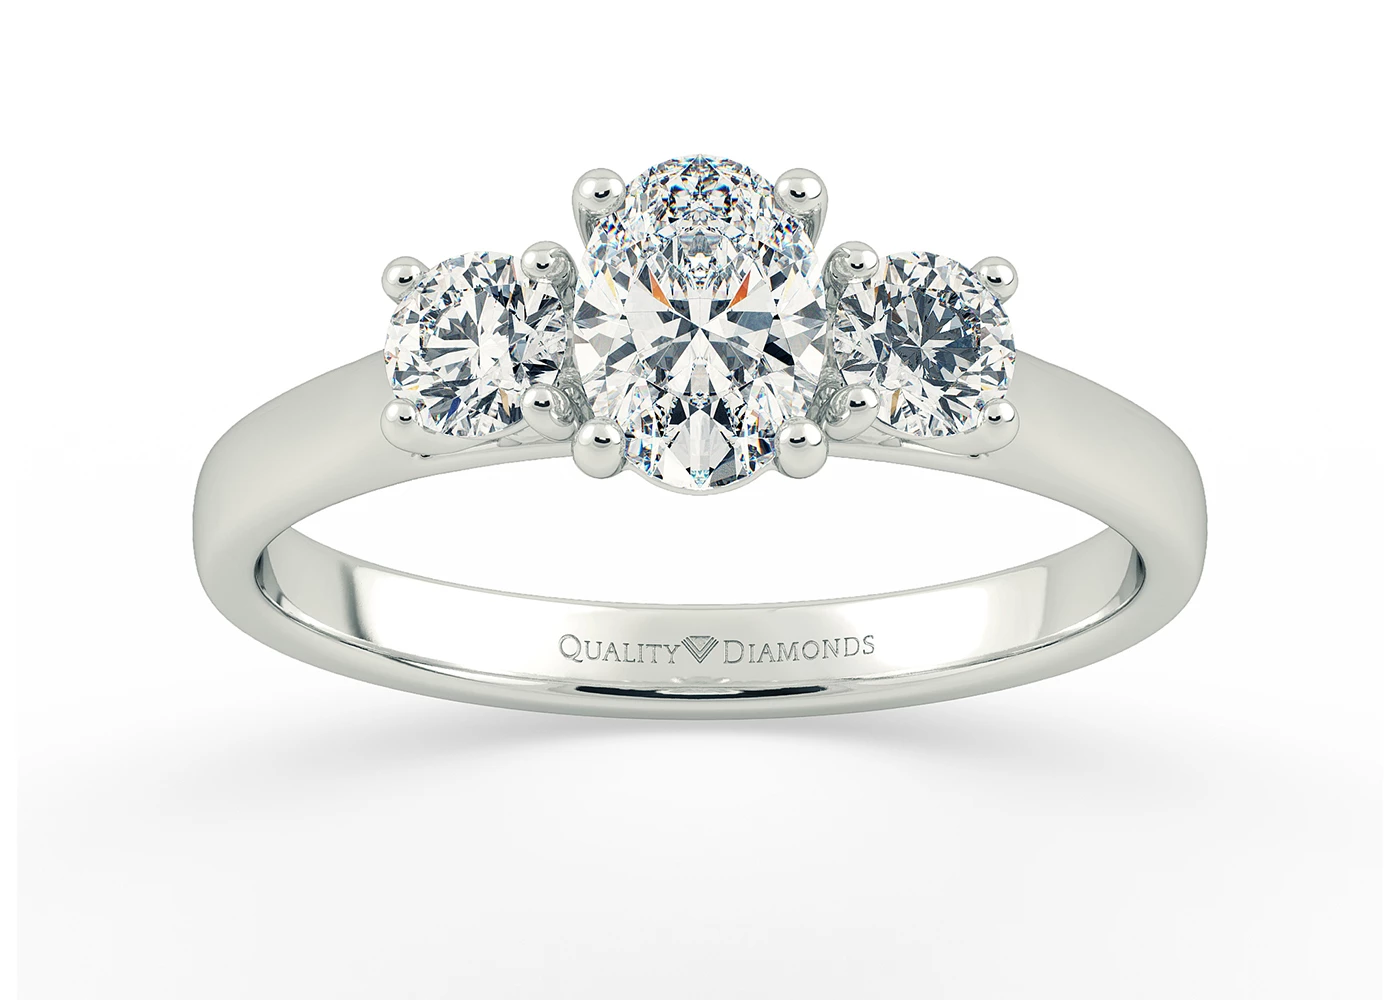 Oval Trilogy Mabelle Diamond Ring in 9K White Gold